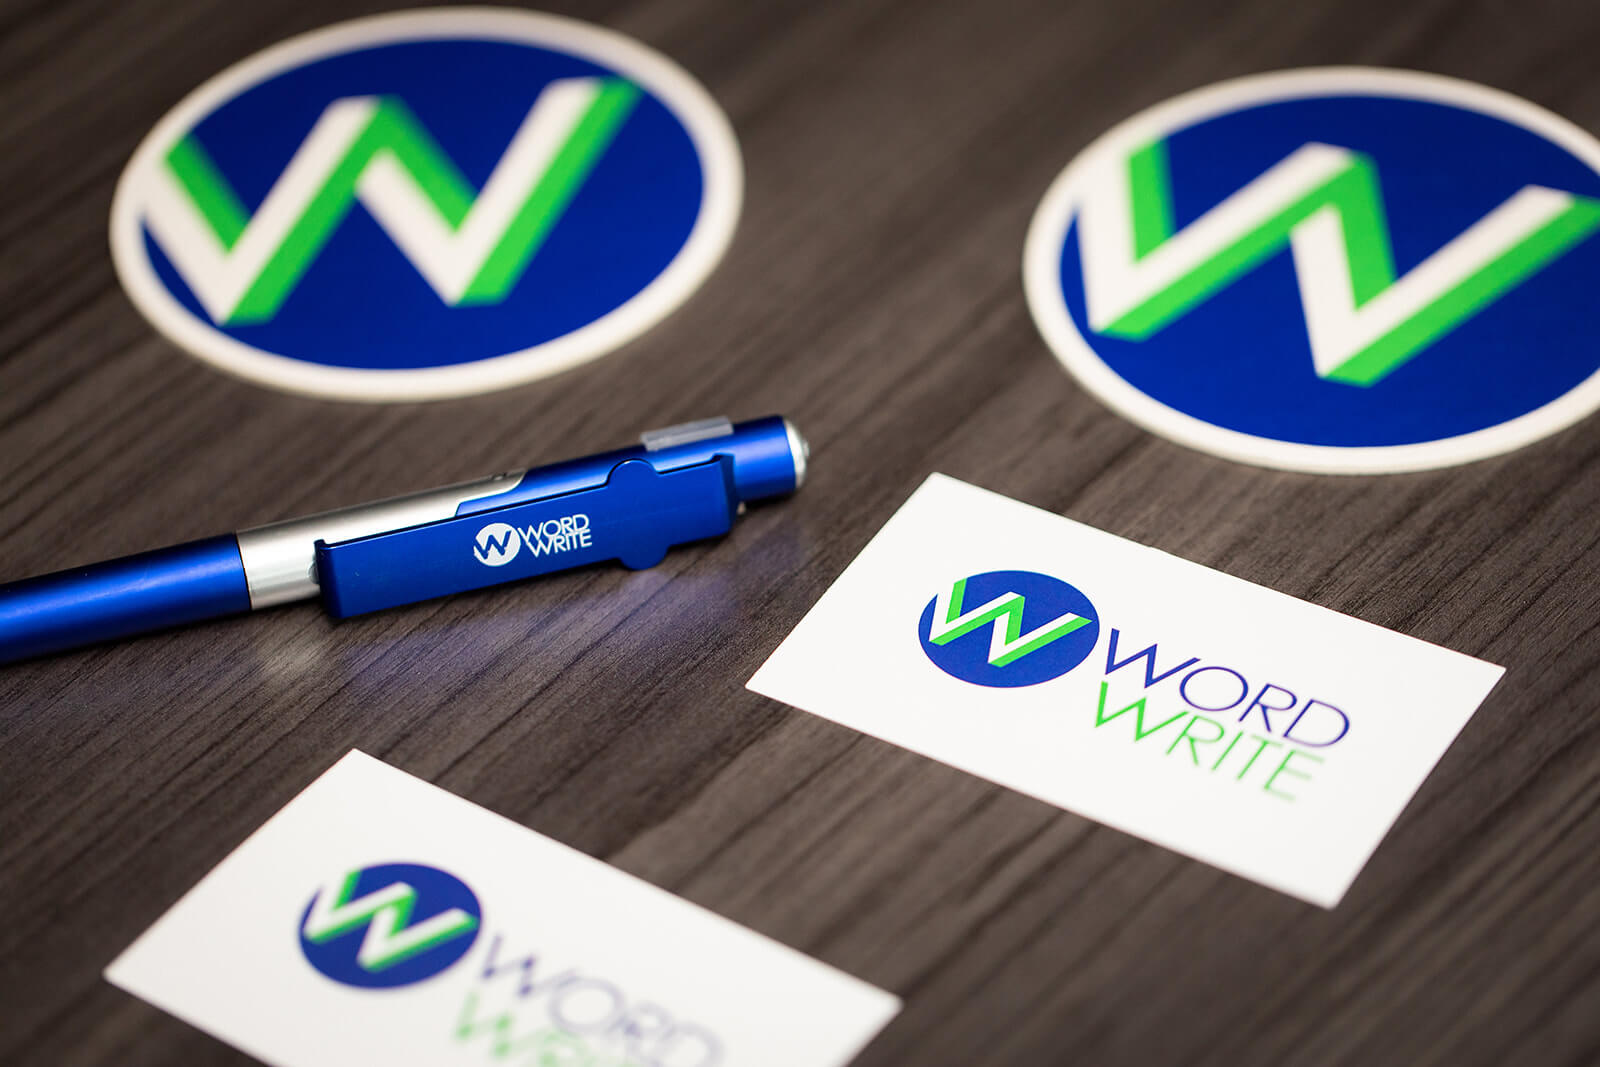 WordWrite coasters, pen, and business cards